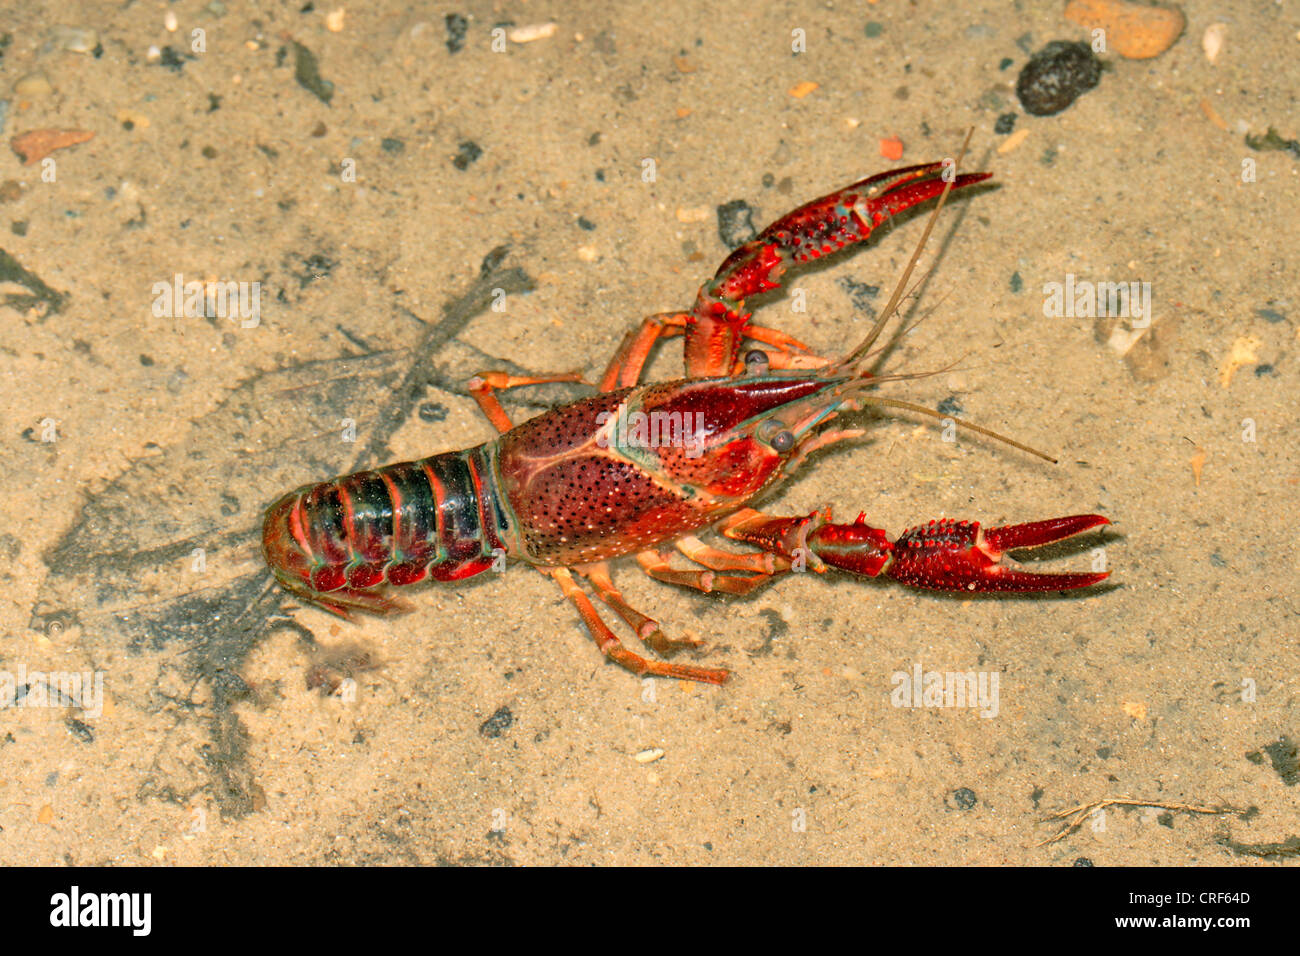 Louisiana red crayfish, red swamp crayfish, Louisiana swamp crayfish, red crayfish (Procambarus clarkii), on sandy ground of a pond Stock Photo